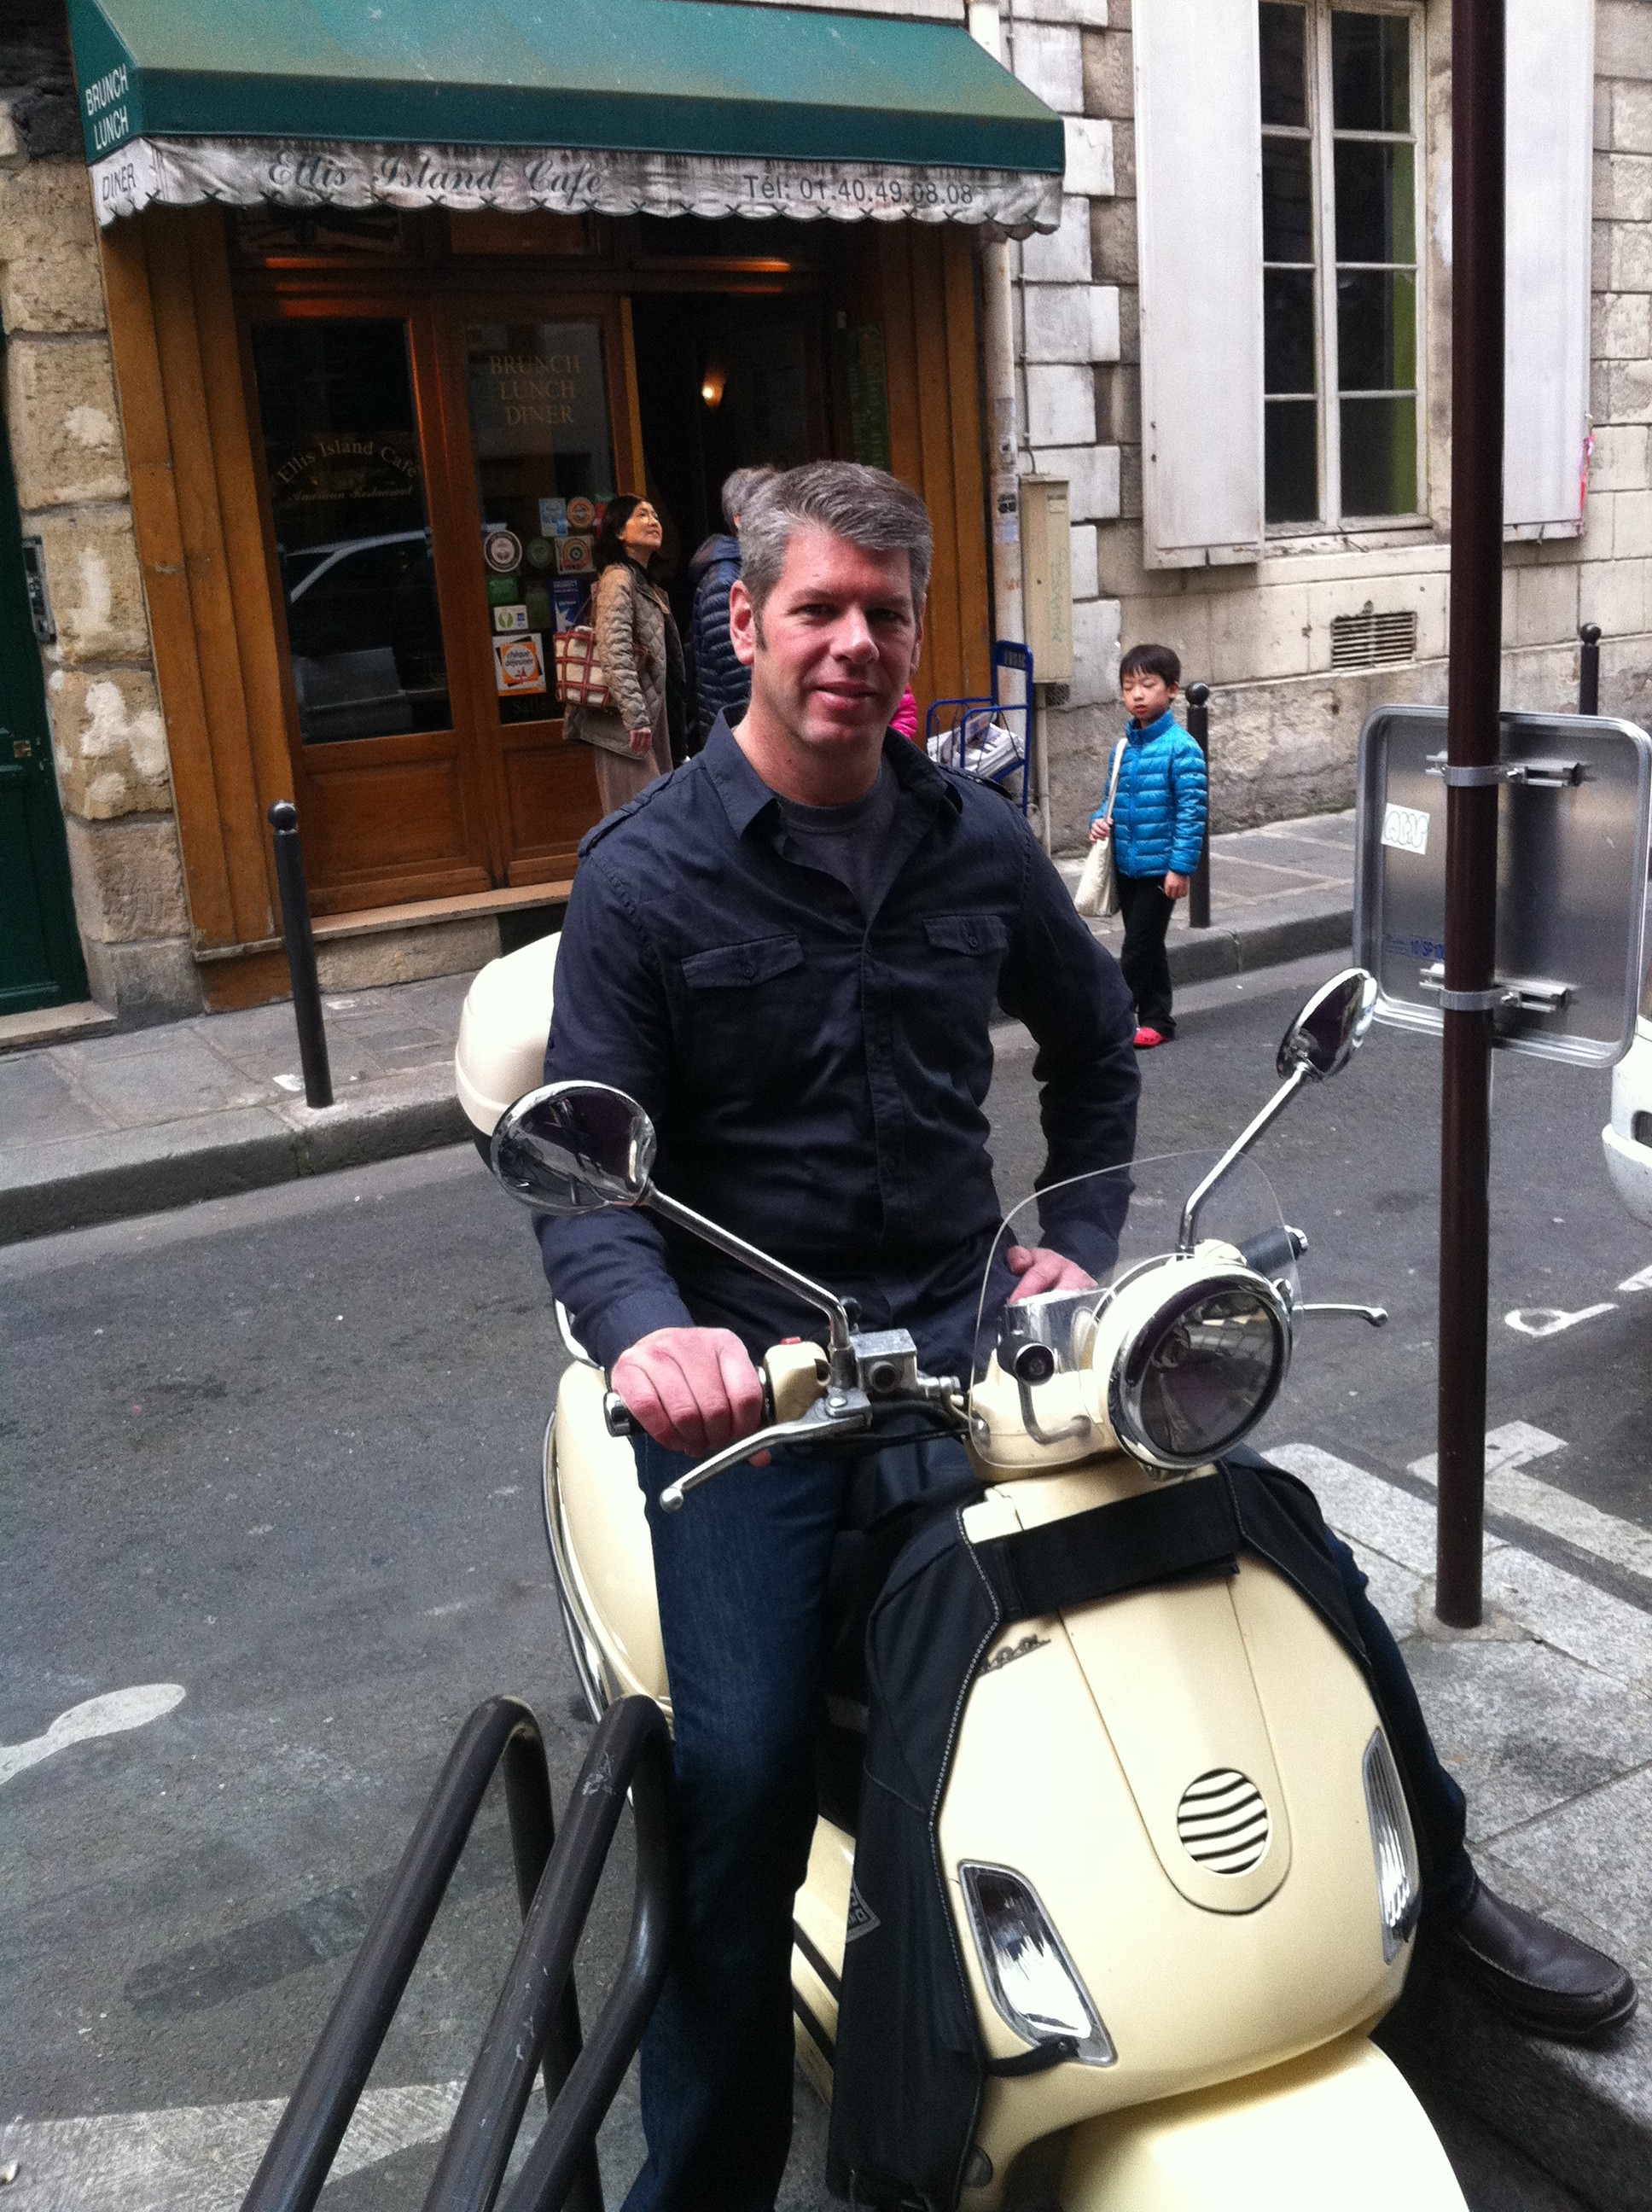 William rent a scooter in Paris - picture of the street Paris france